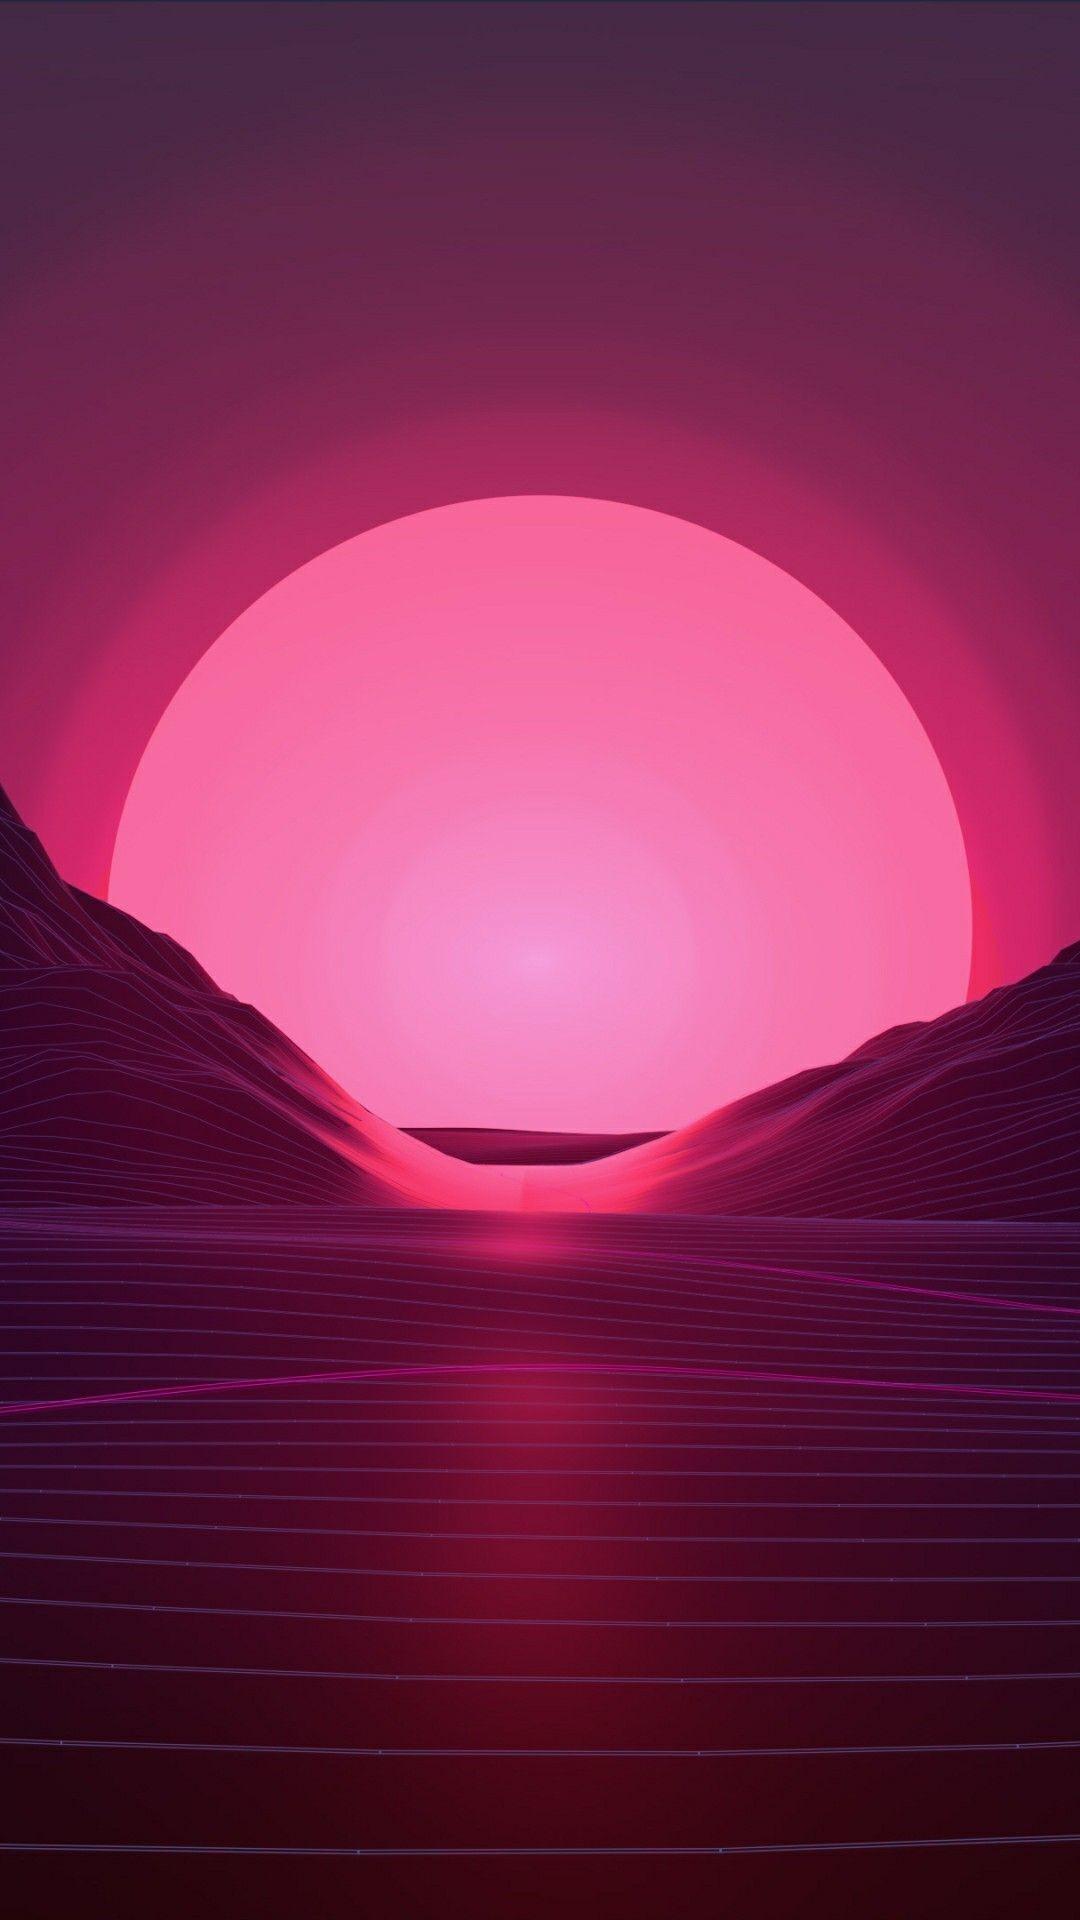 Vaporwave iPhone Wallpaper background picture